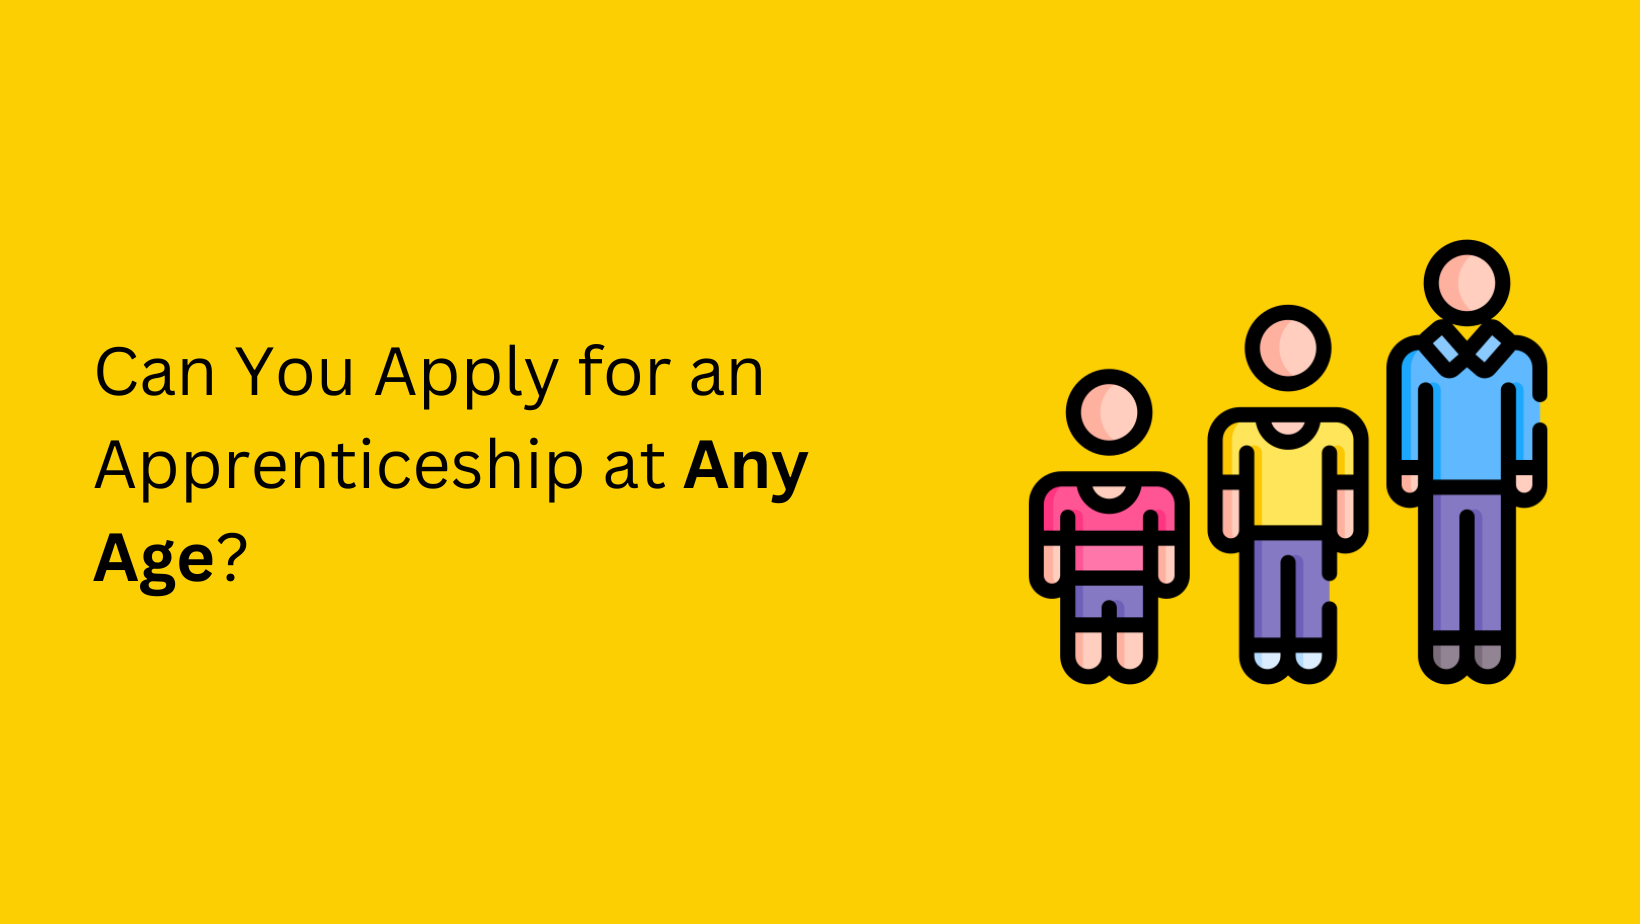 Can You Apply for an Apprenticeship at Any Age